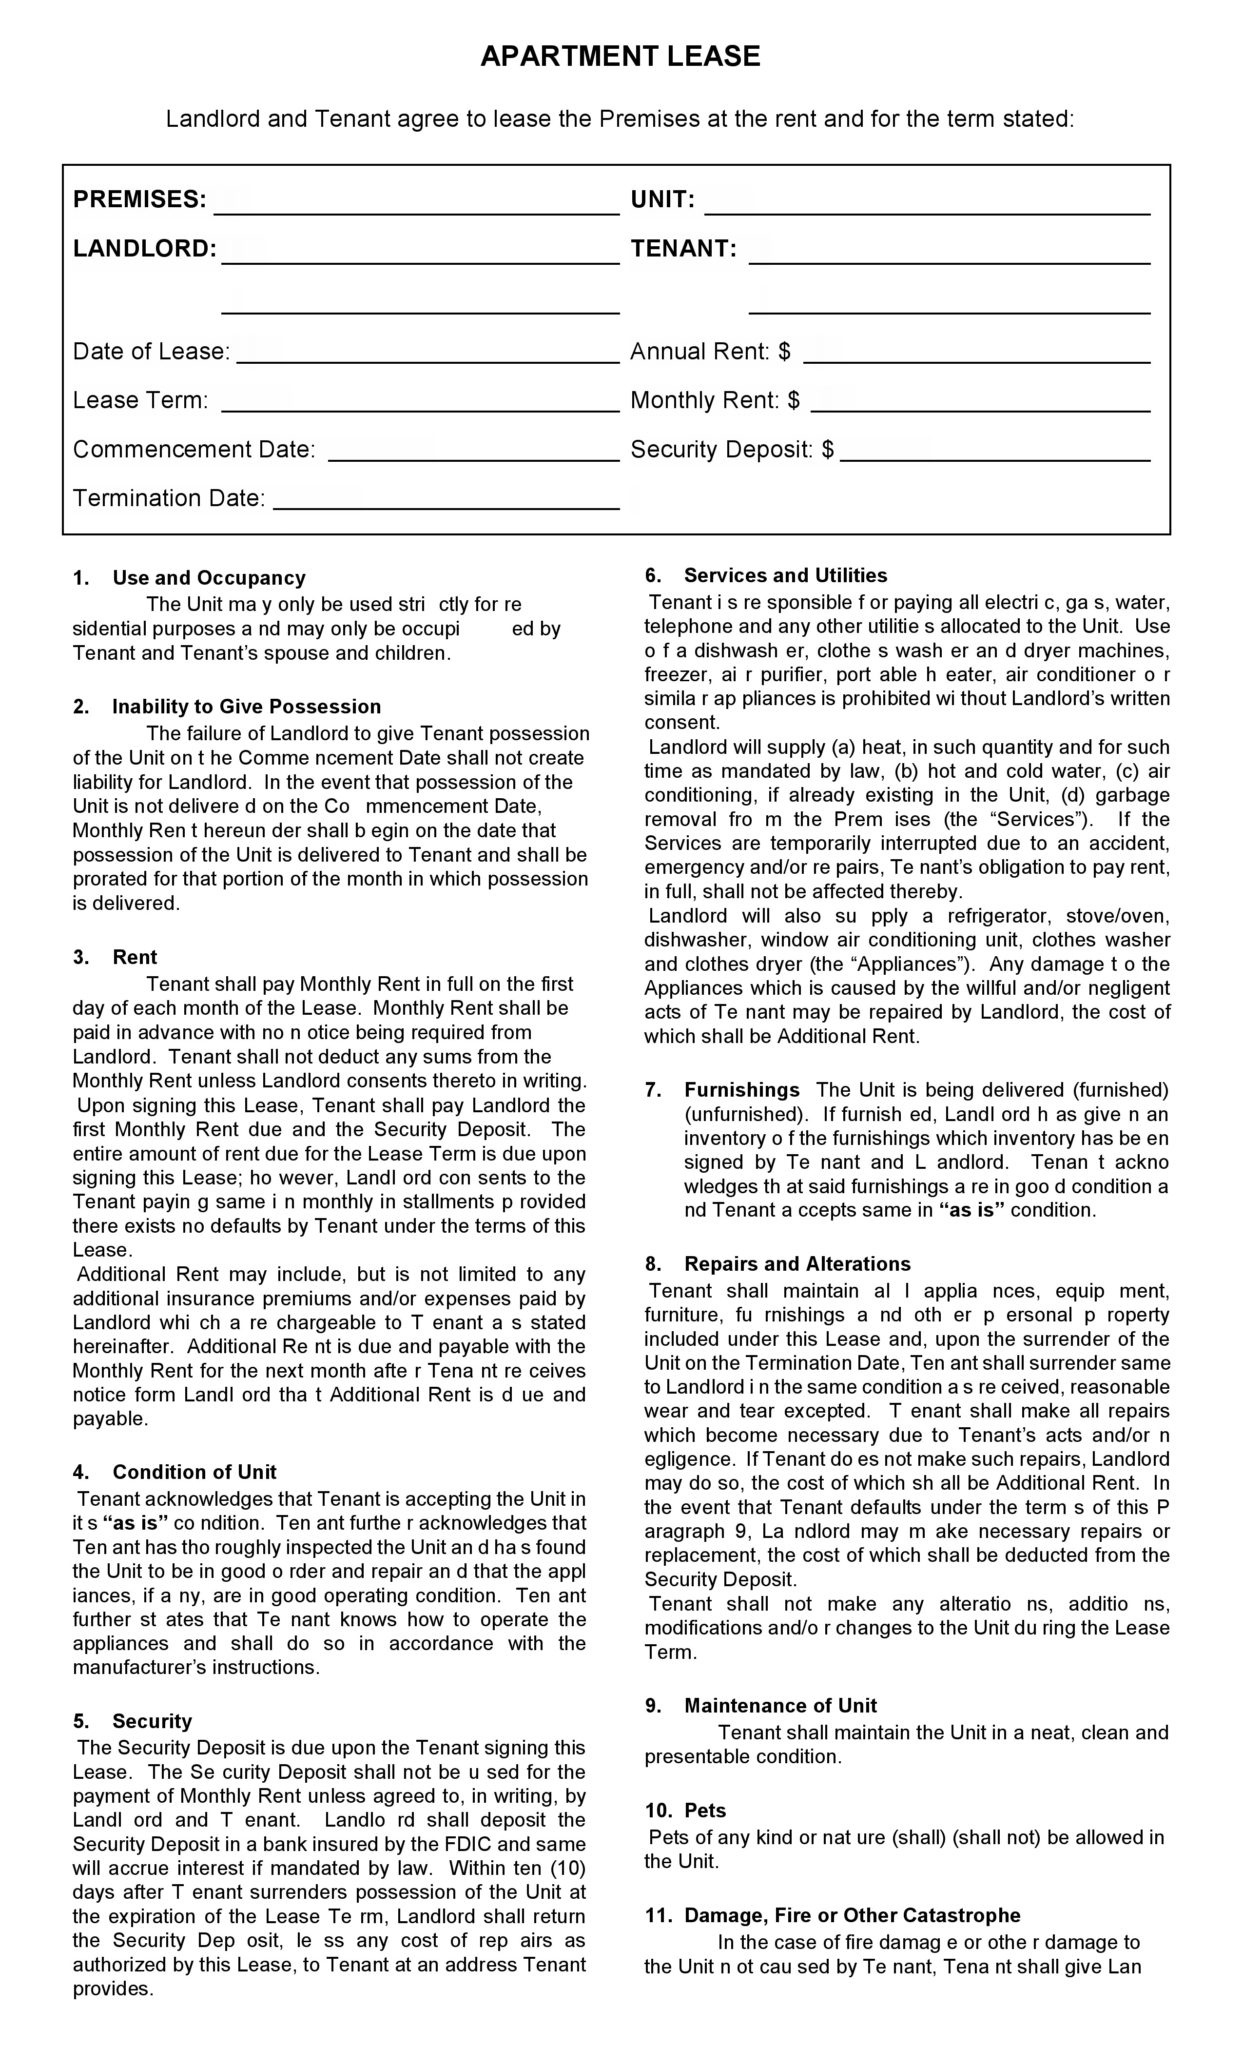 Free Printable Apartment Lease Agreement - Printable Agreements - Free Printable Lease